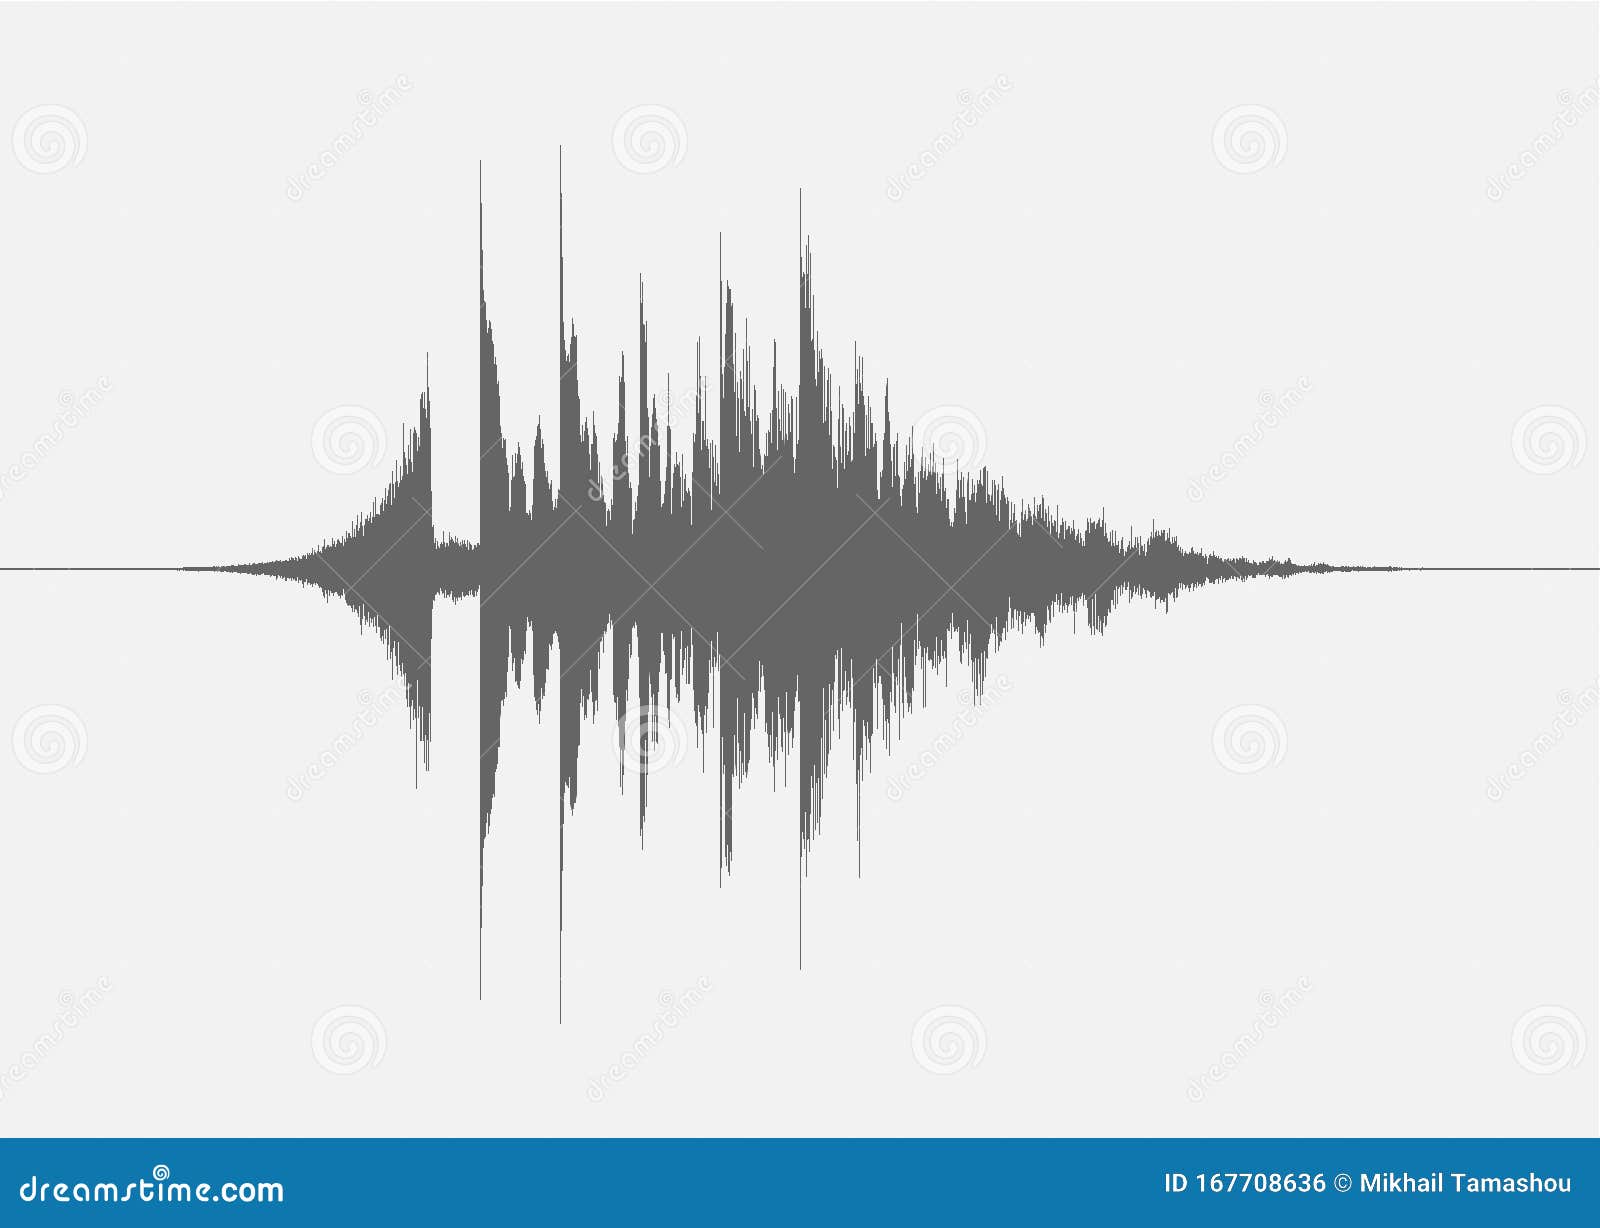 Royalty-Free Logo Sound Effects & Audio - Dreamstime